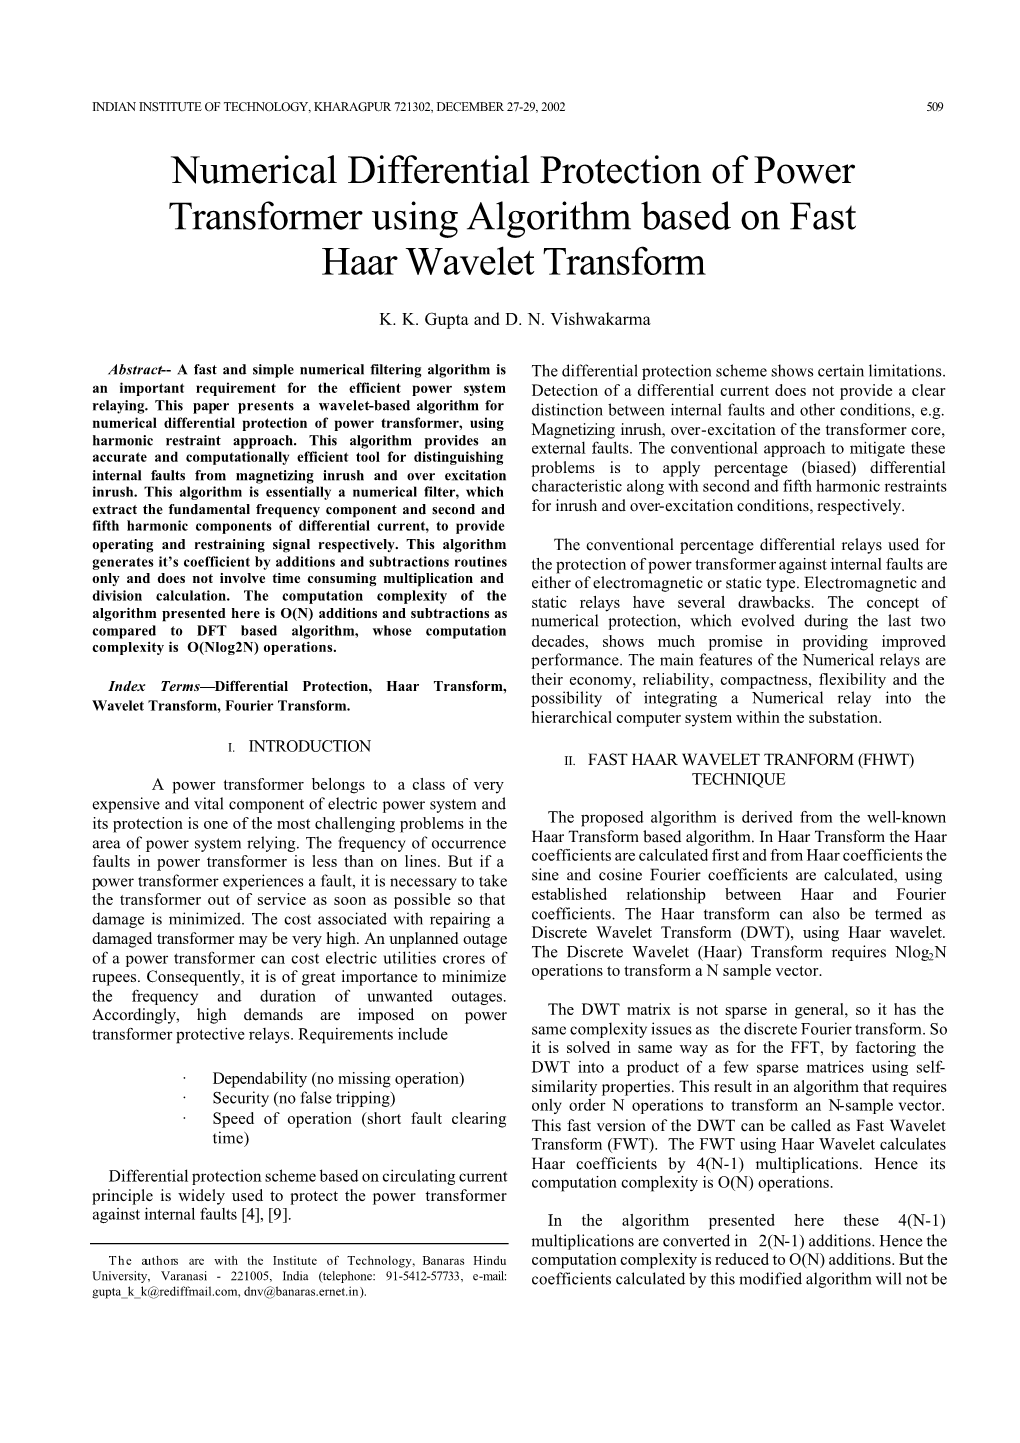 Numerical Differential Protection of Power Transformer Using Algorithm Based on Fast Haar Wavelet Transform